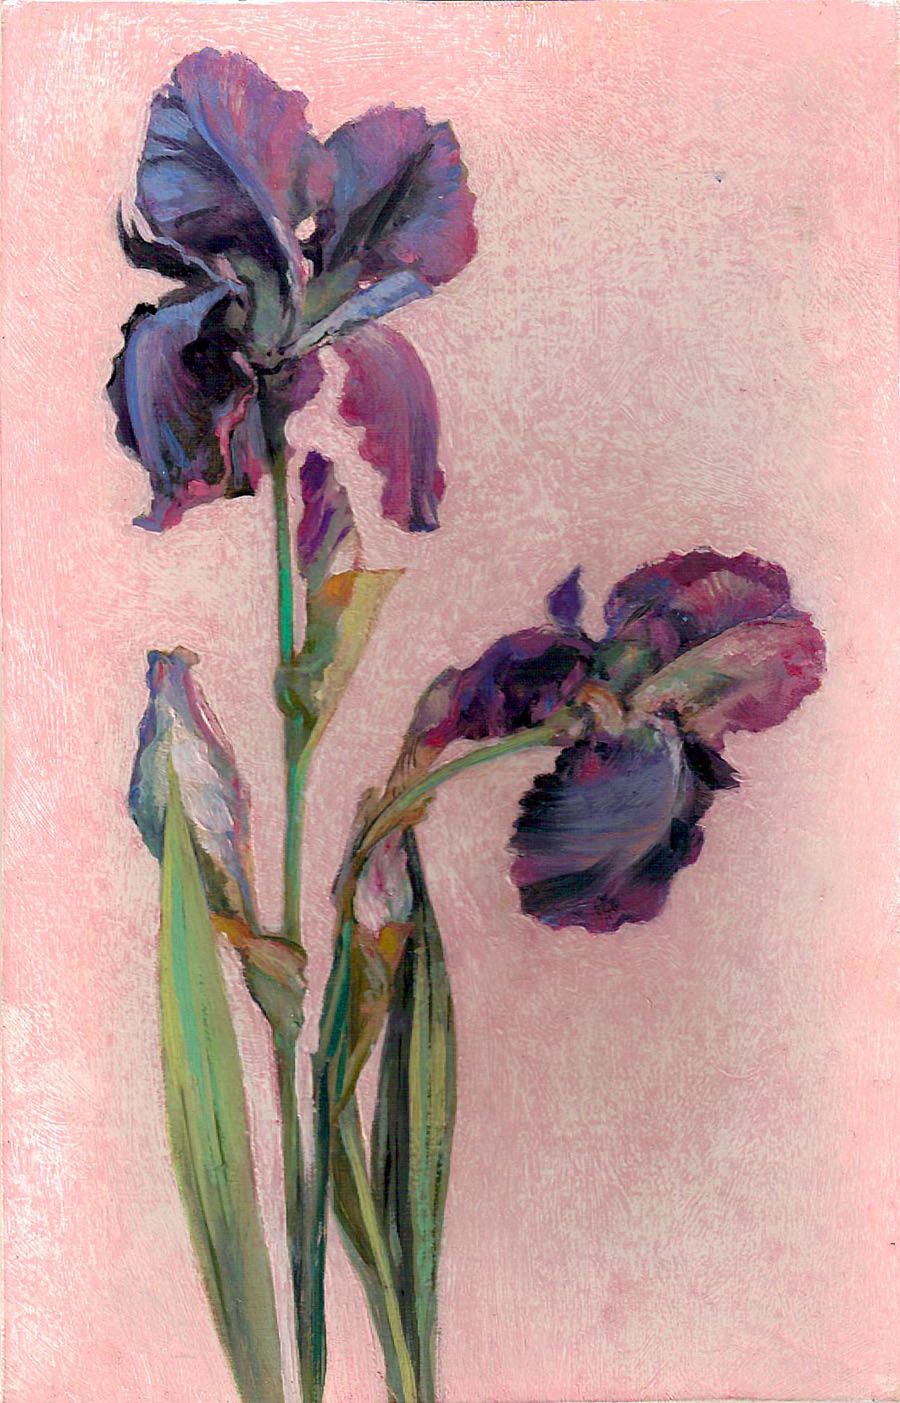 [Irises+on+a+pink+background+++7+by+11.jpg]